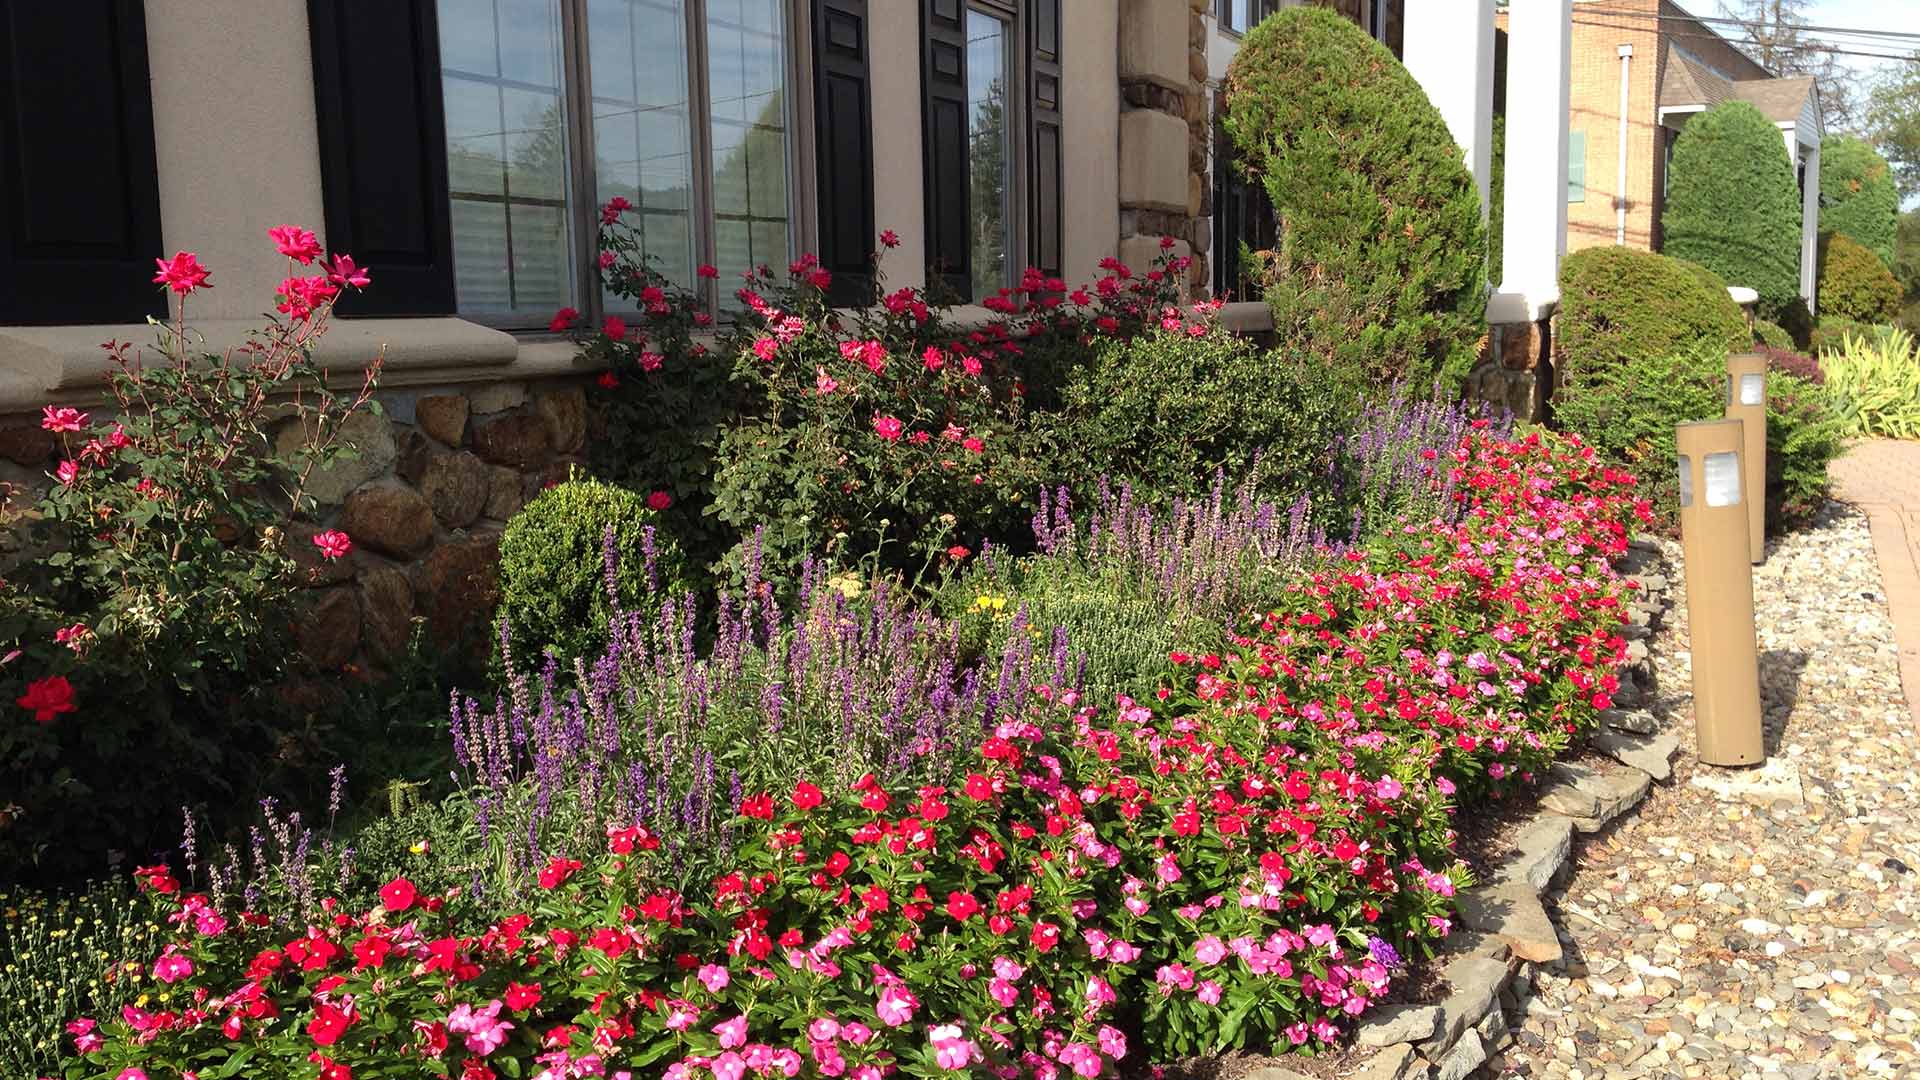 Beautiful landscape installation with annual flowers in Scotch Plains, NJ.